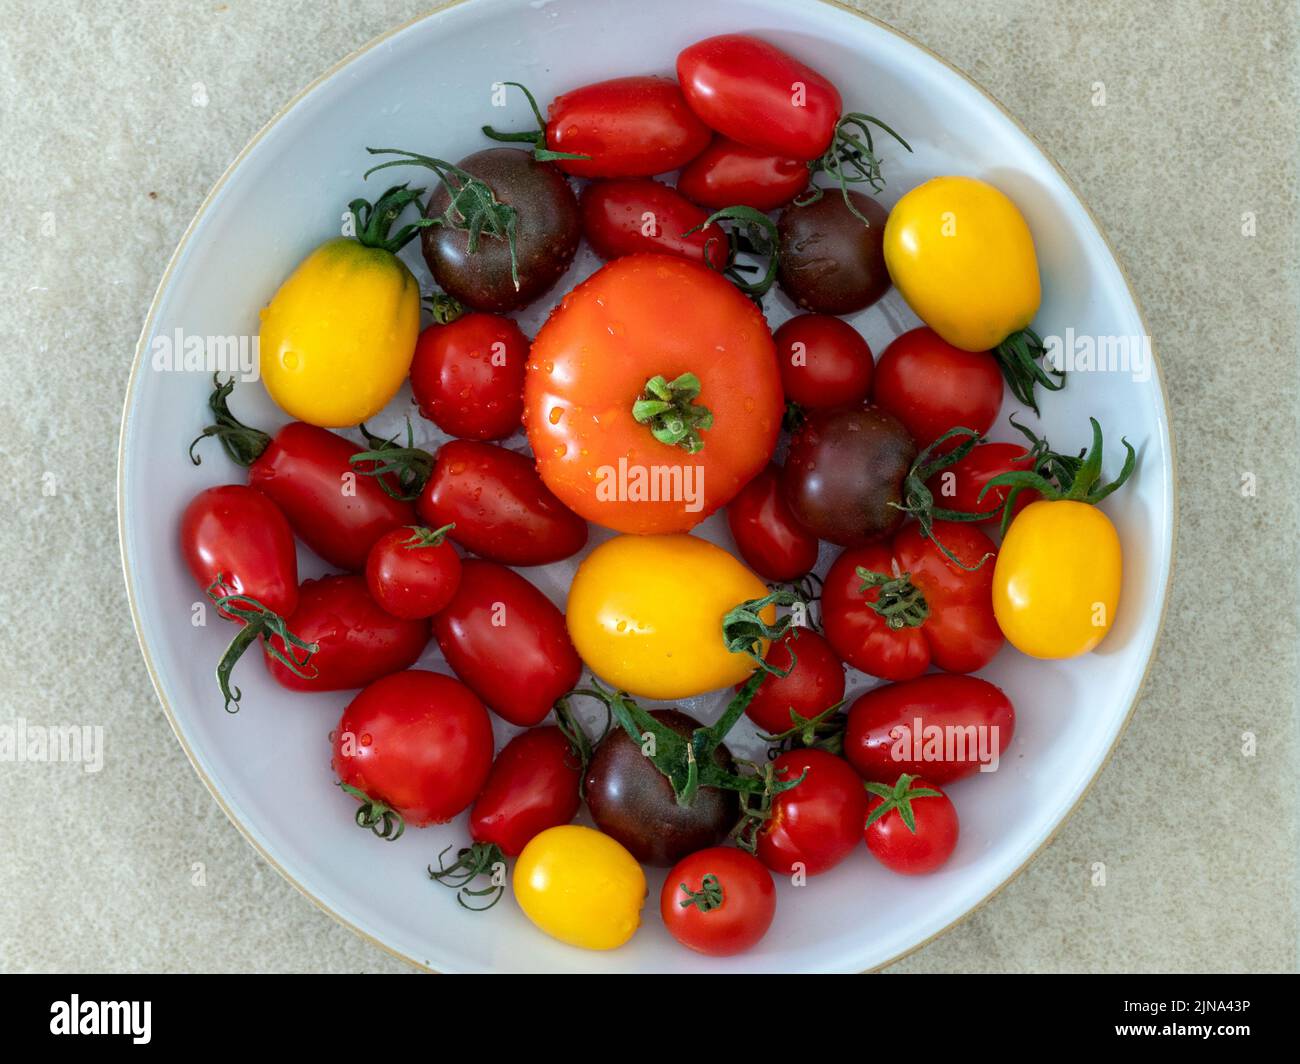 Mixed homegrown tomato varieties in a bowl Stock Photo